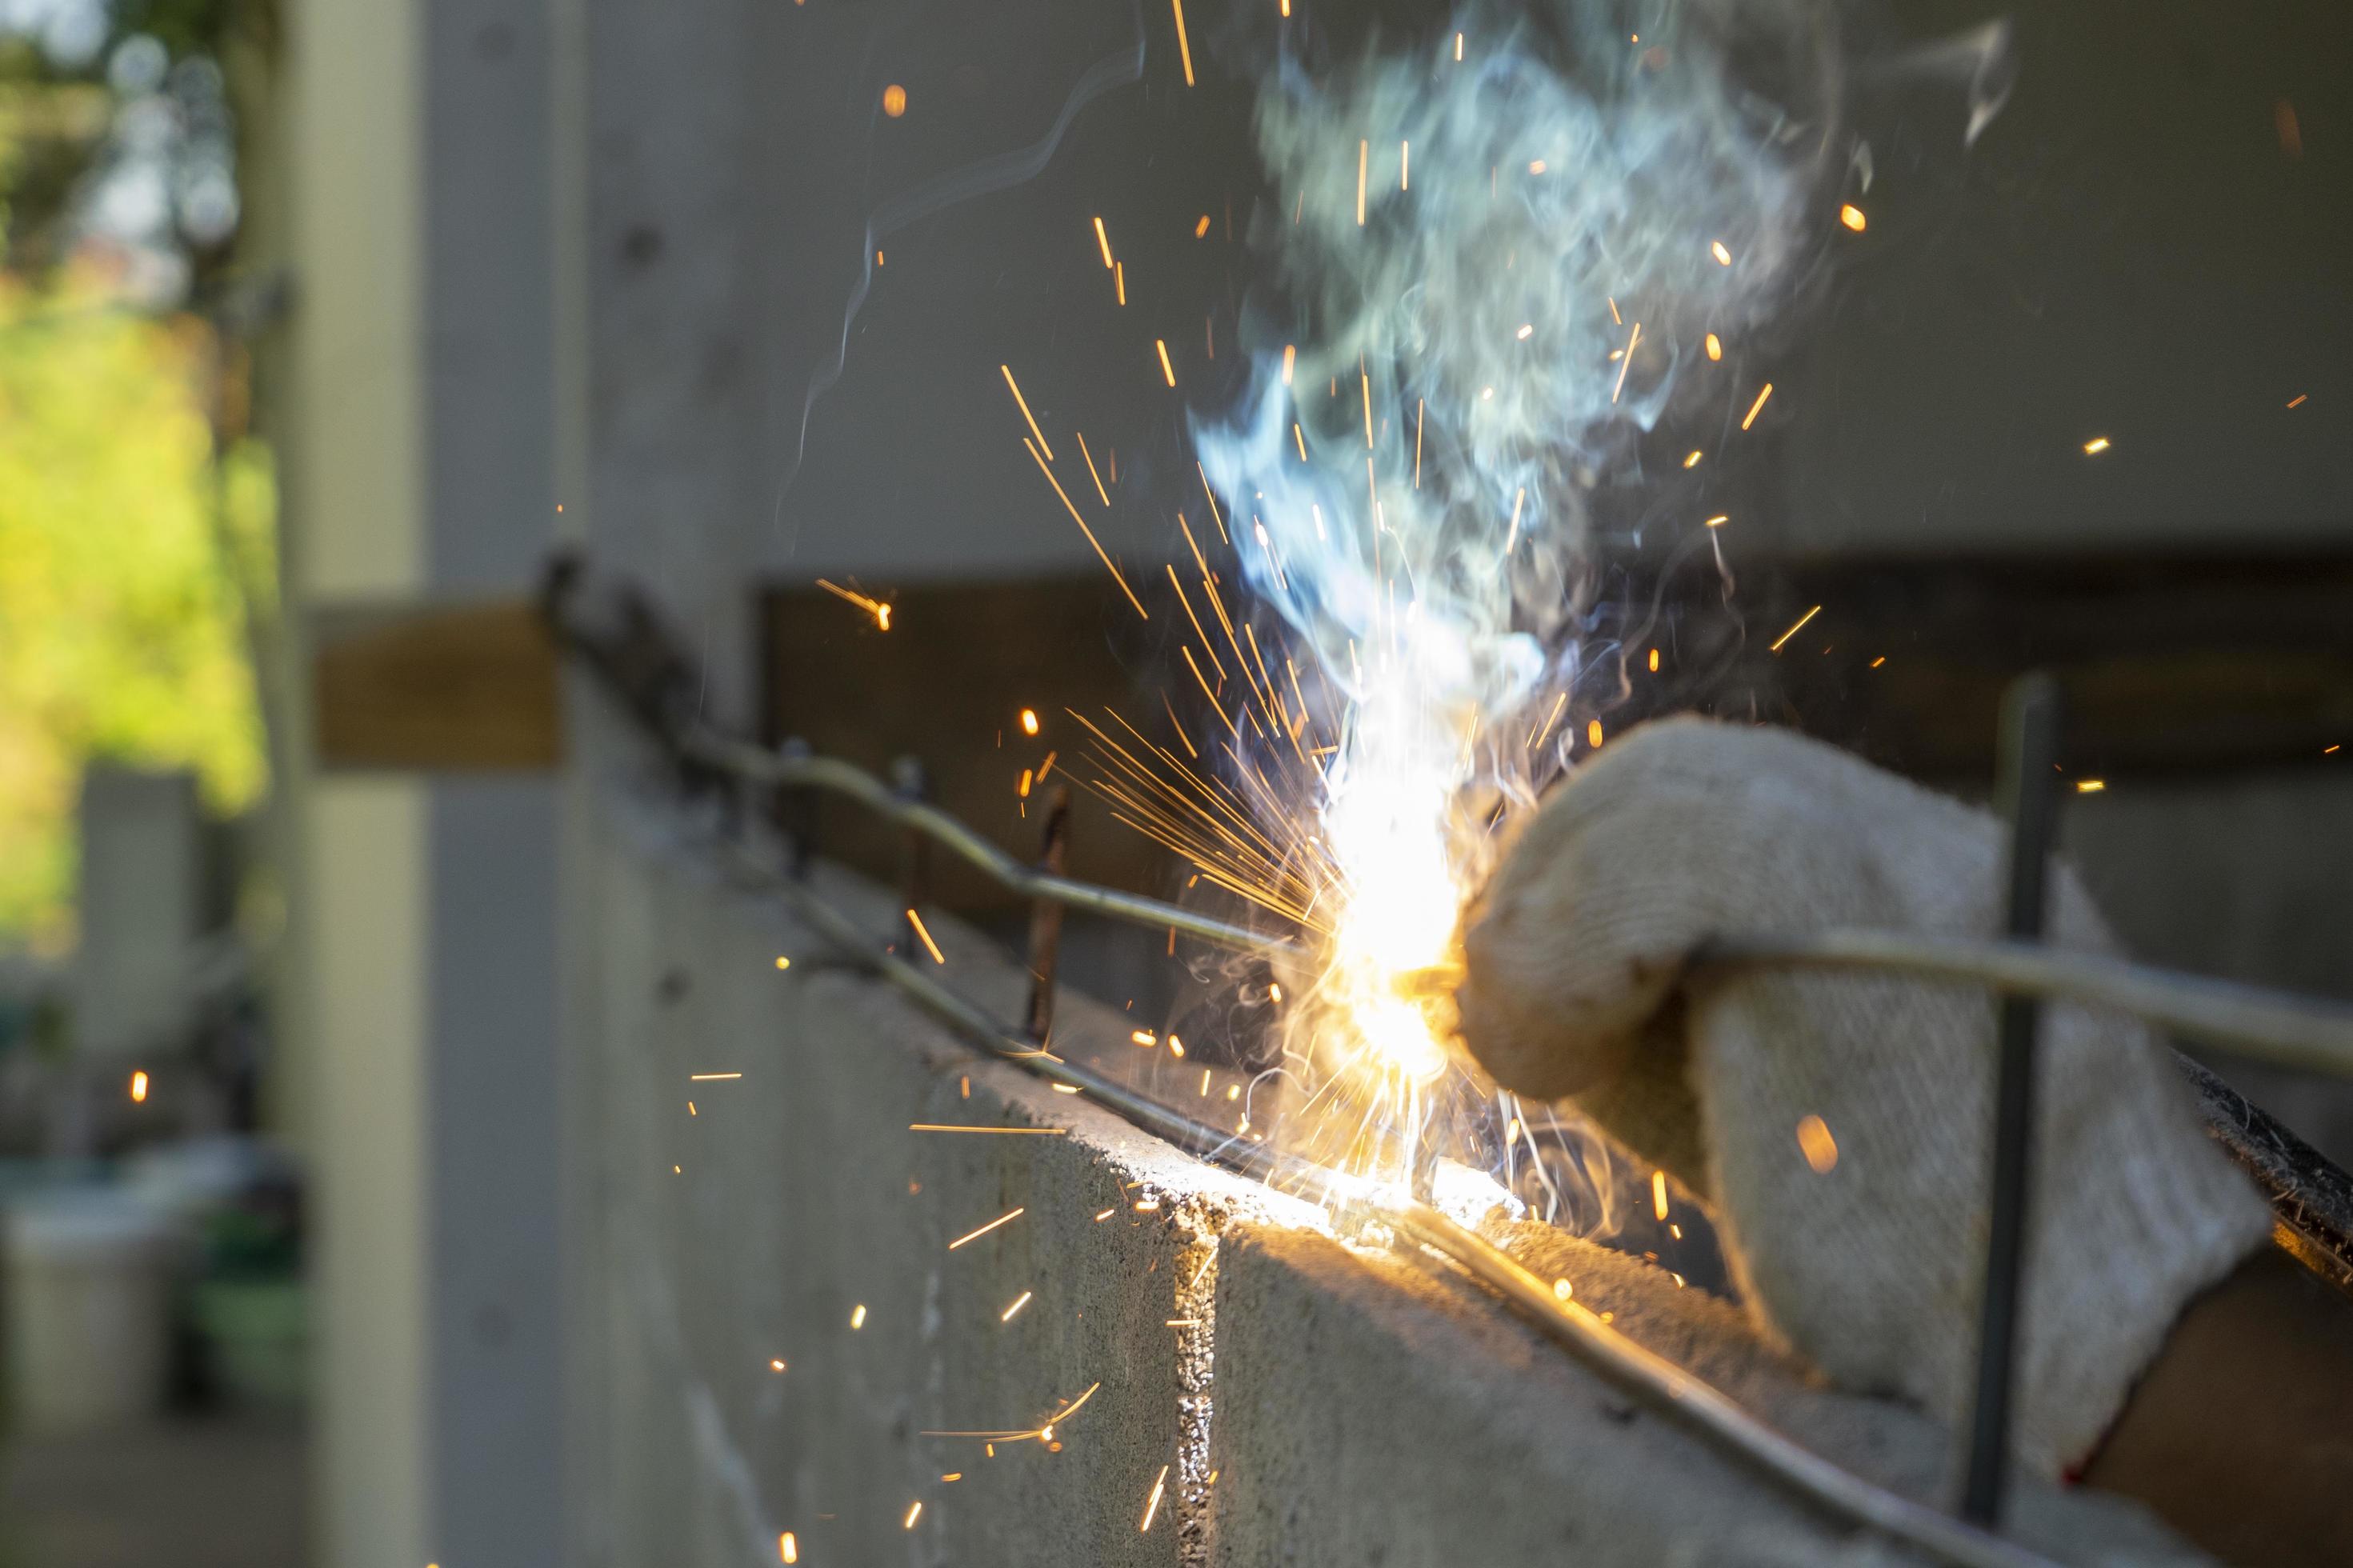 Welder and welding sparks, Construction and metal work industrial. photo